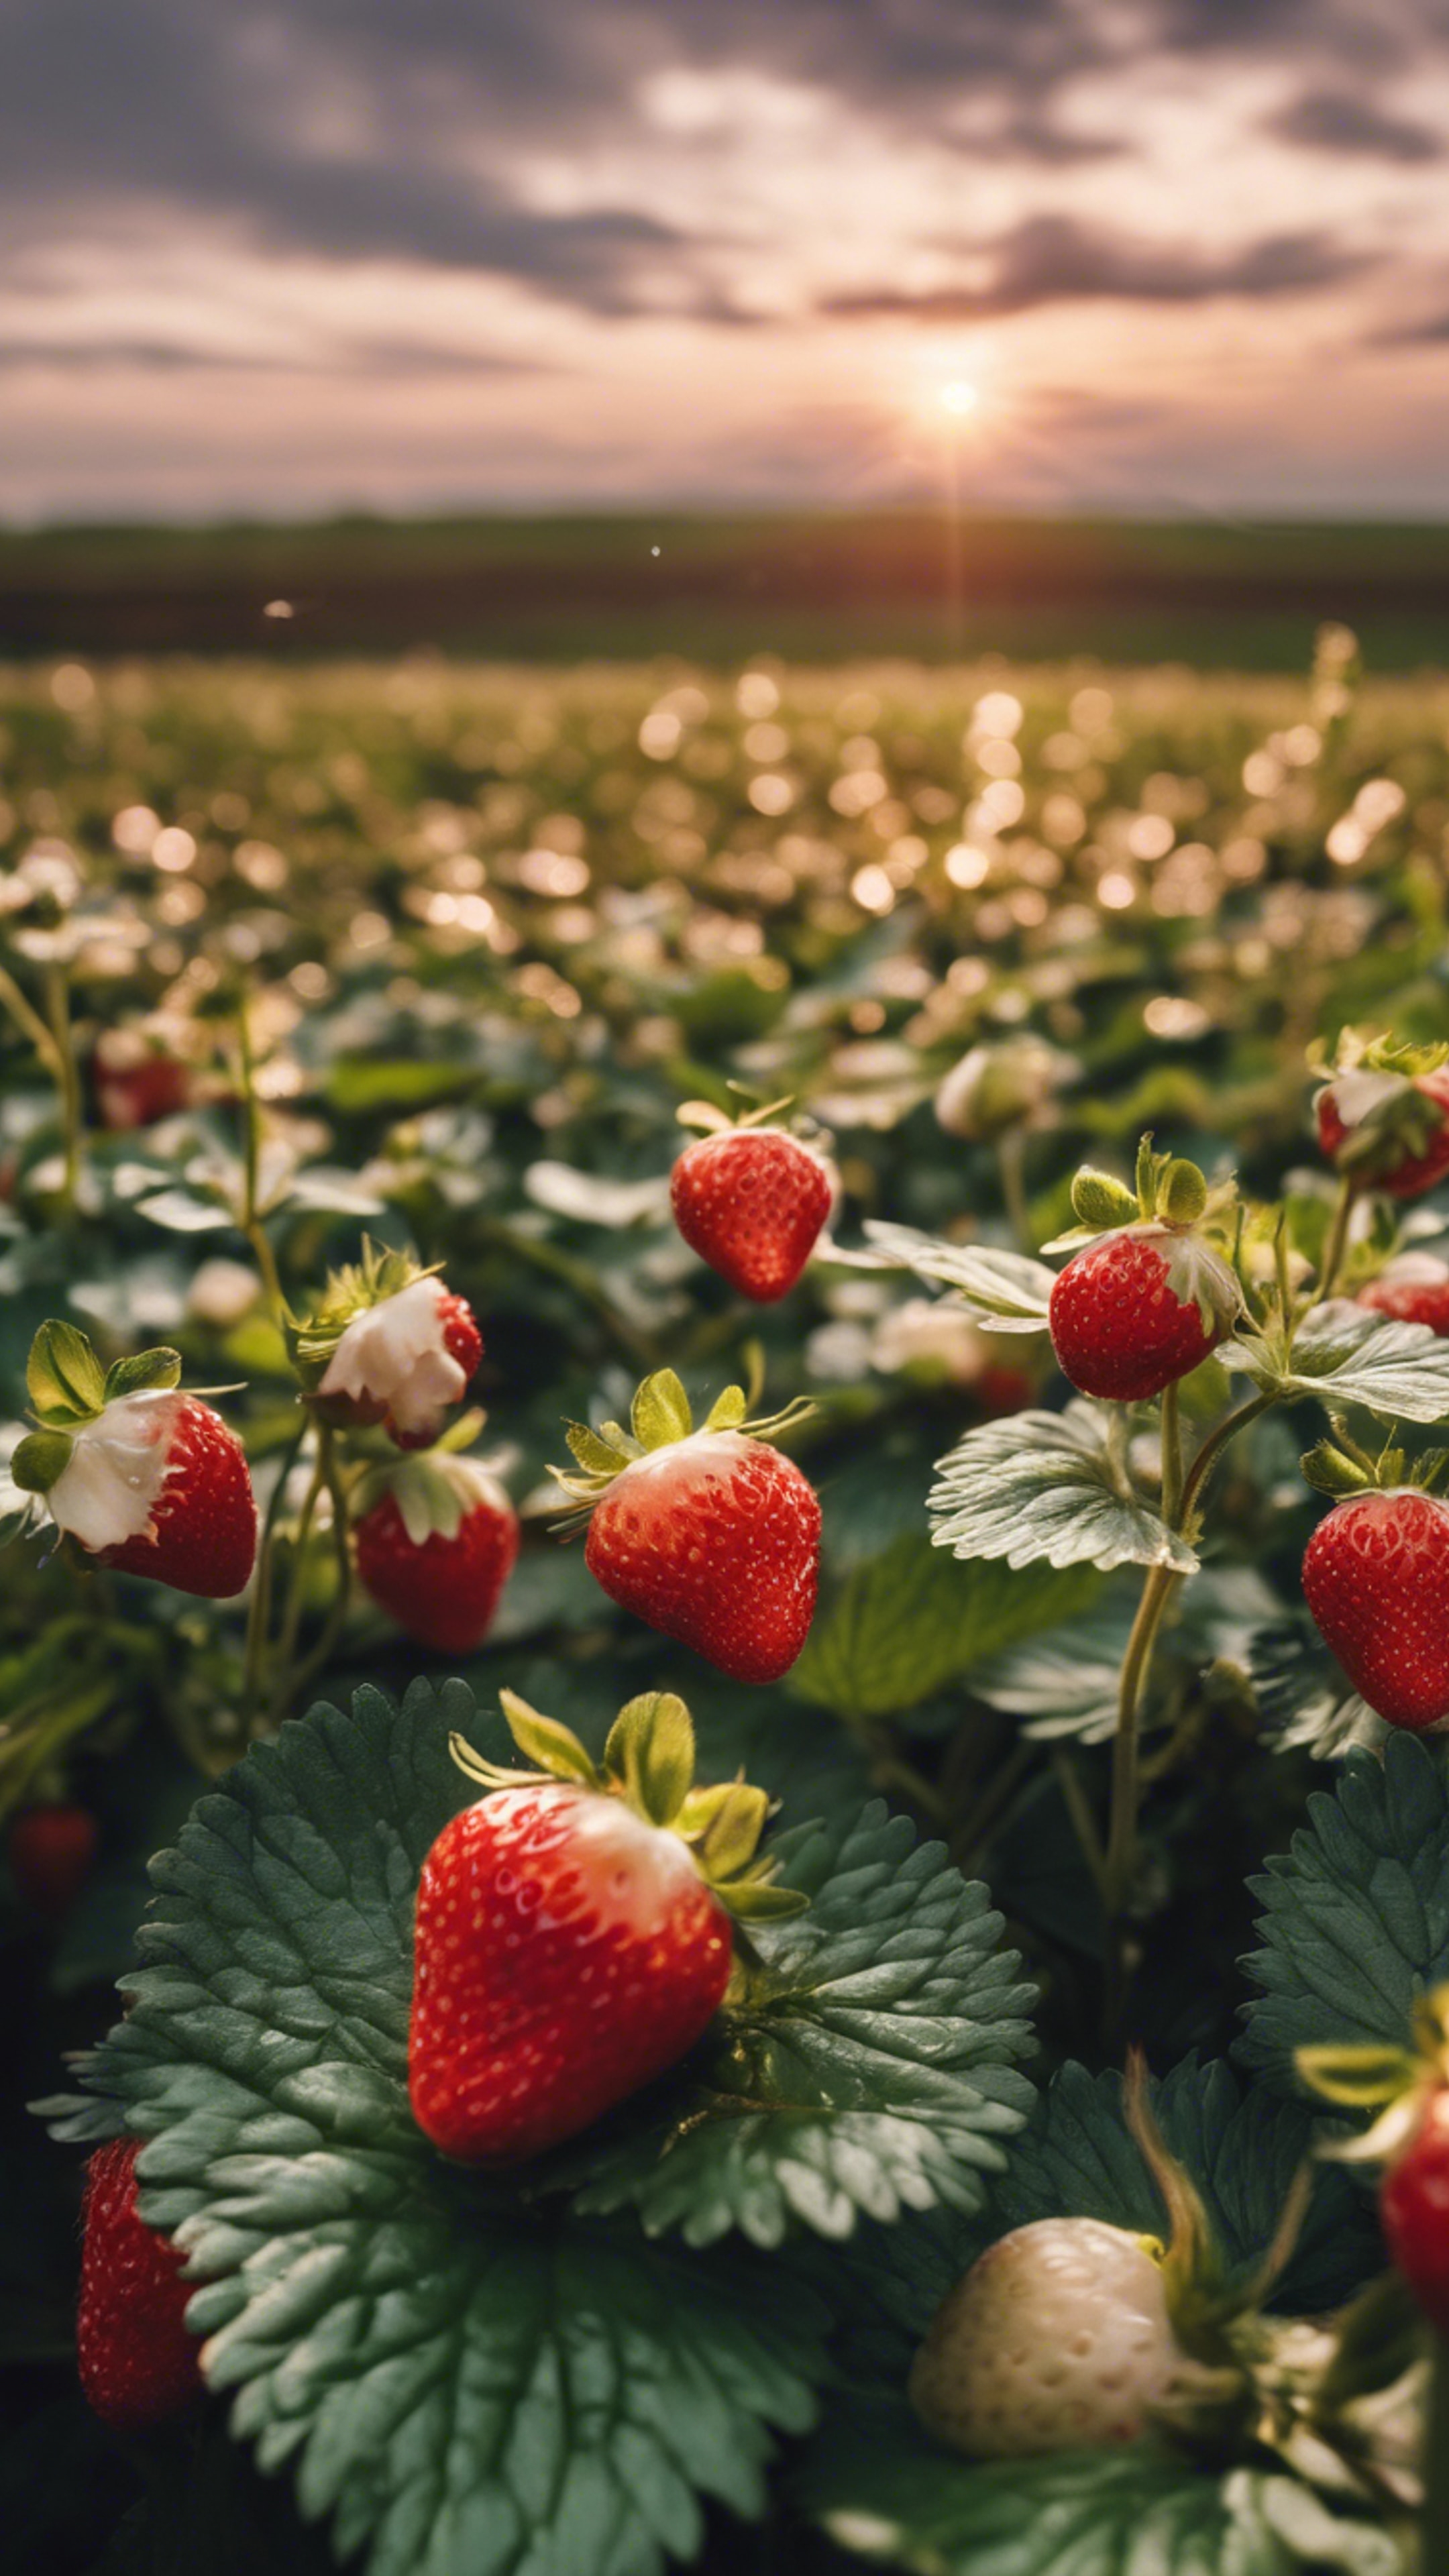 A romantic sunset view over a field of blooming strawberry plants. Hintergrund[3adde1a5bf4e4528ba85]